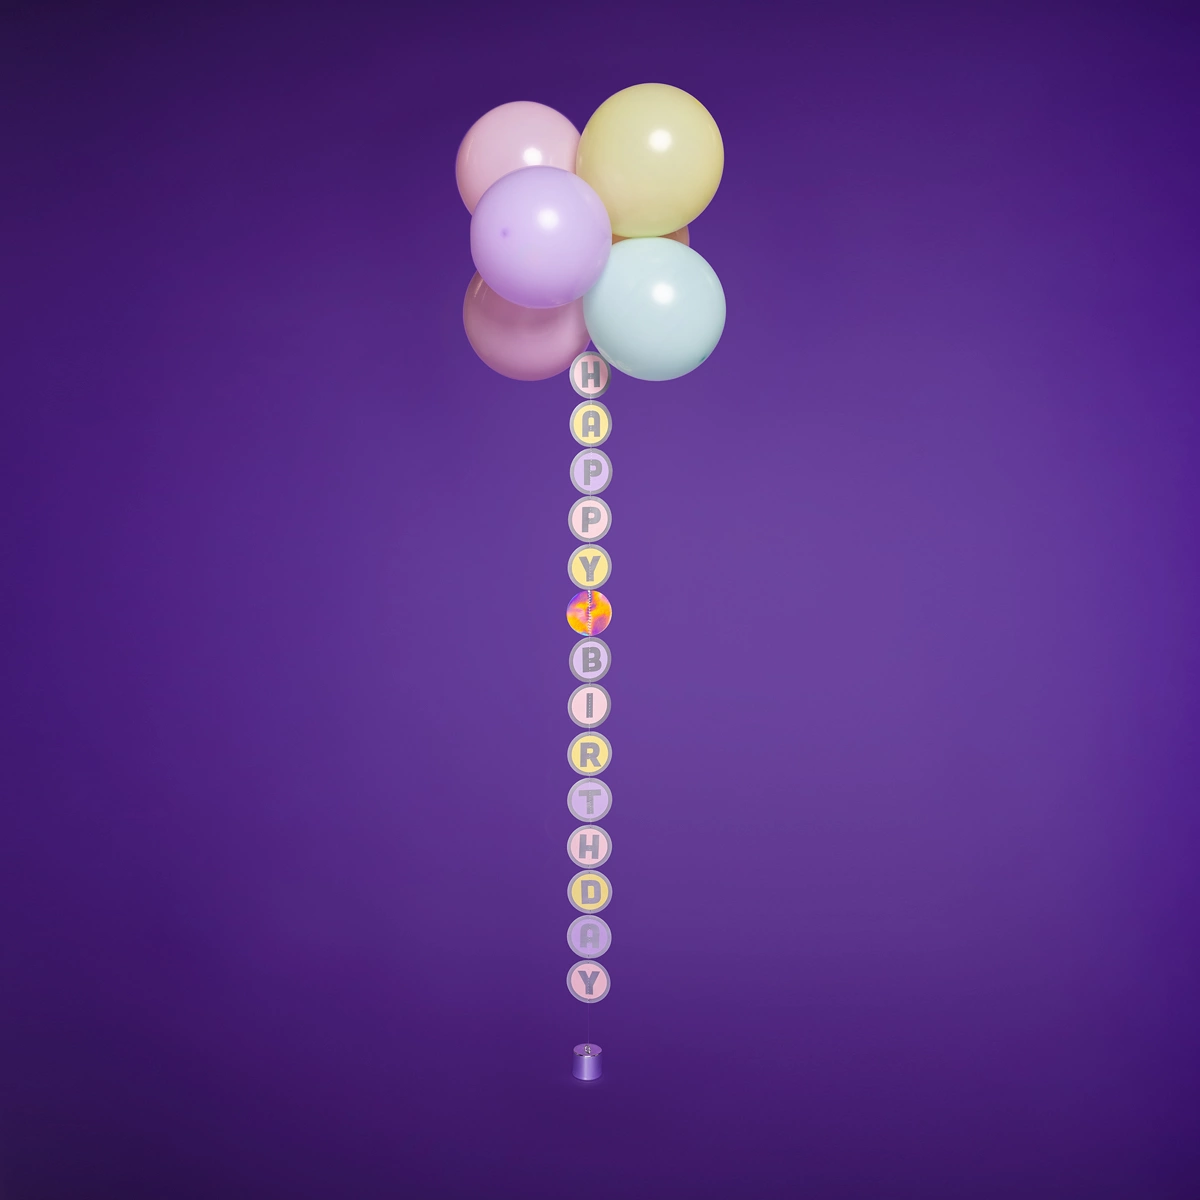 Happy Birthday - Pastel color tail with colorful floating balloons